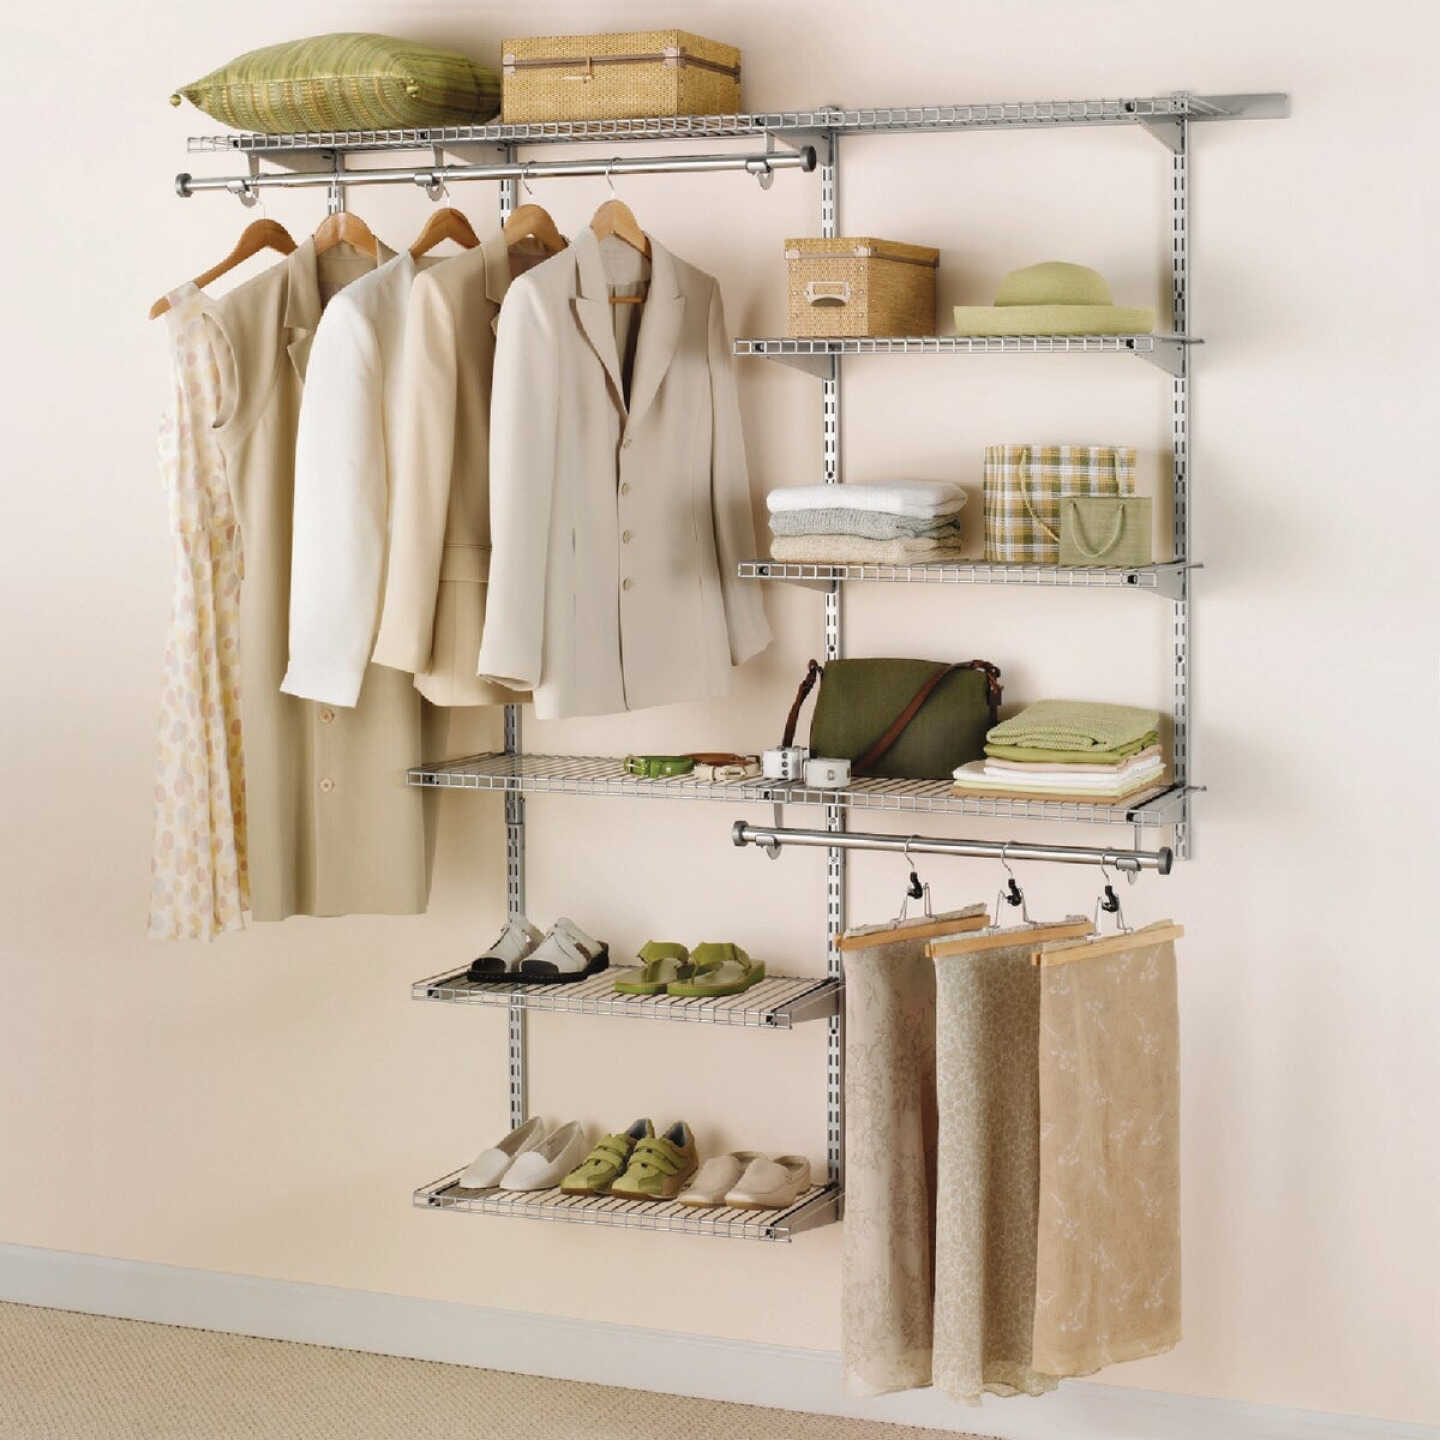 How To Install Closet Shelves  Rubbermaid Fasttrack Closet Kit